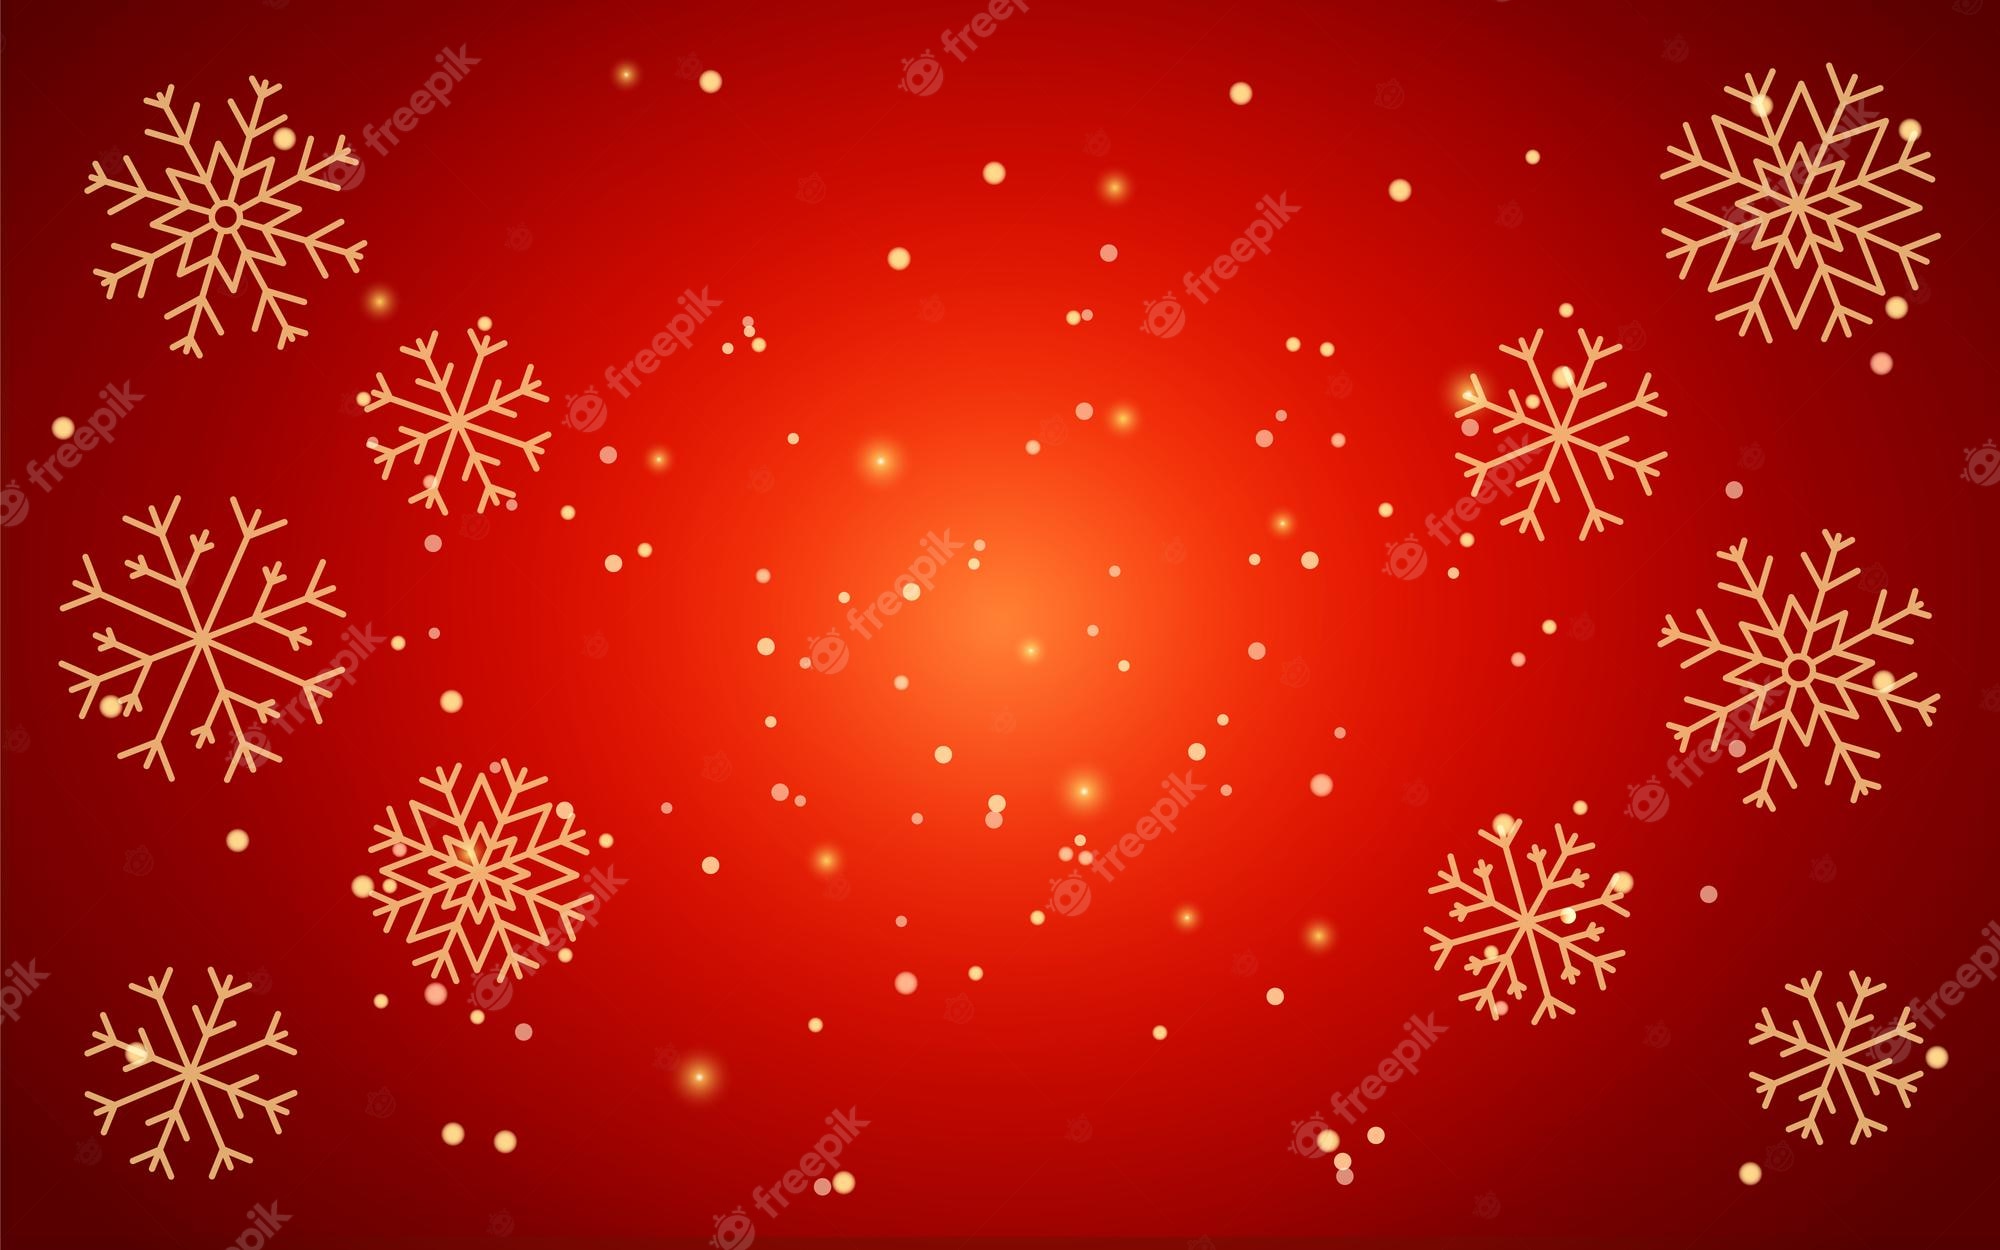 Red snowflake background images